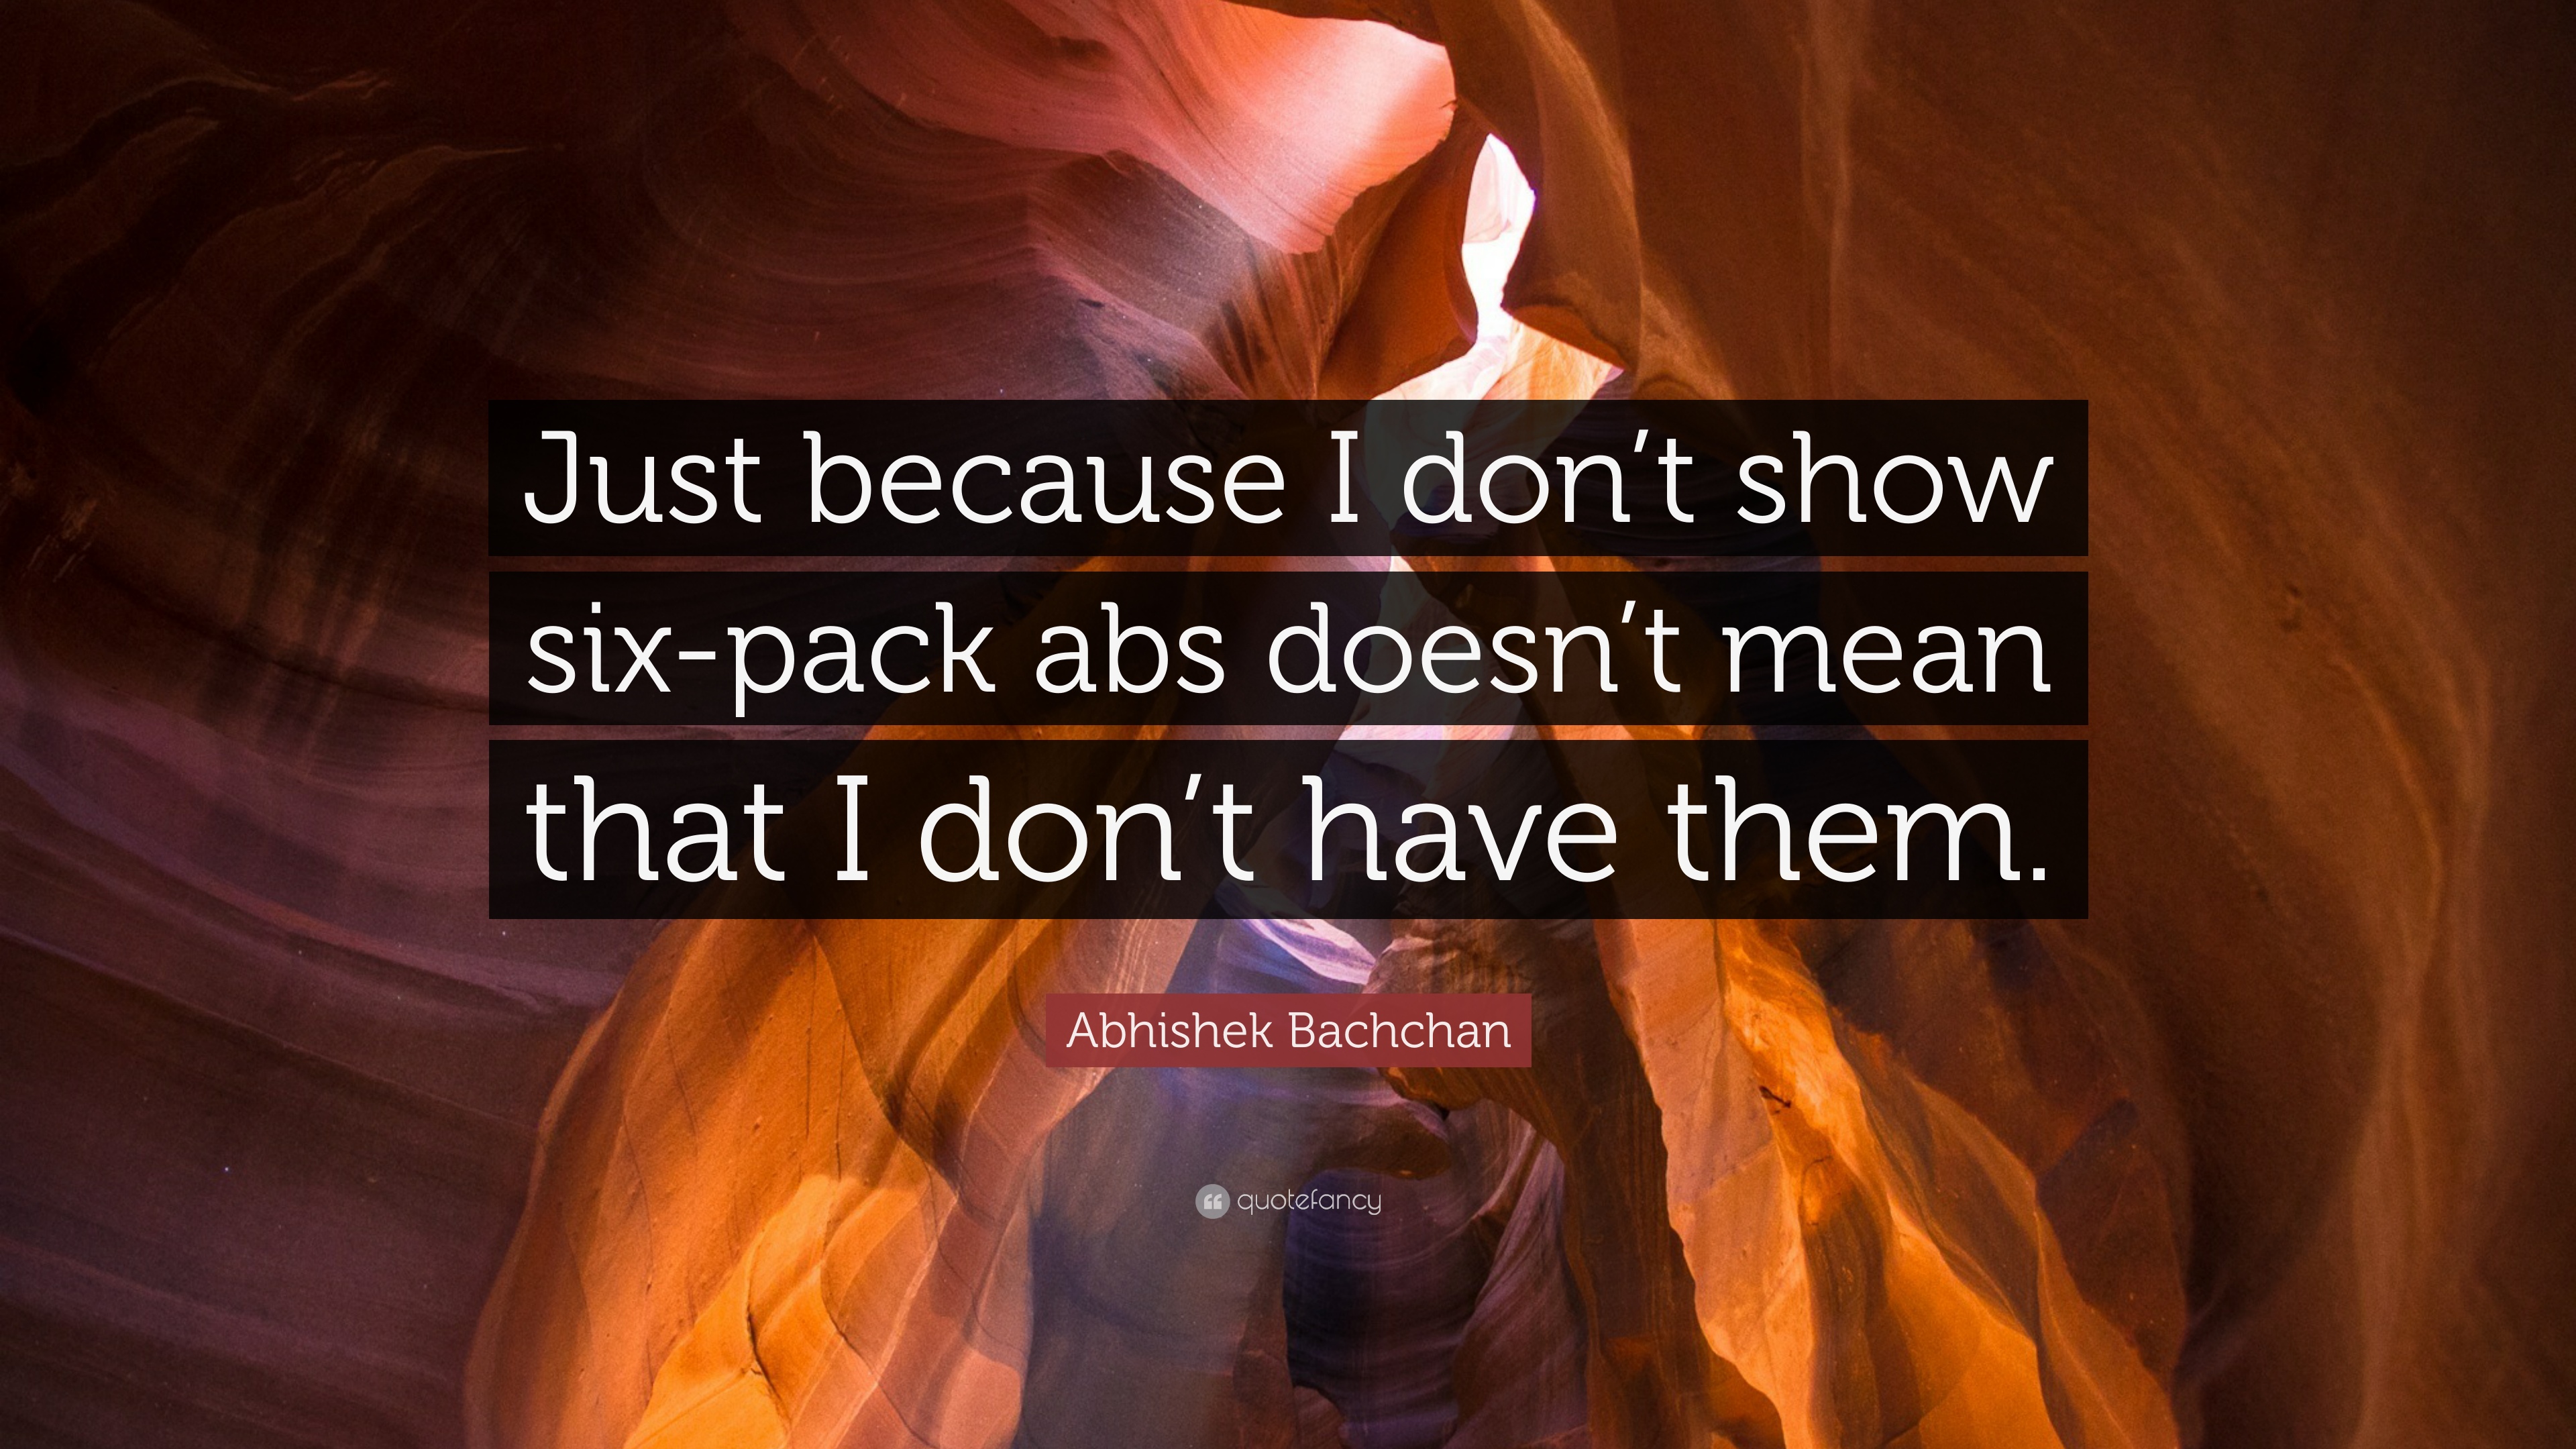 Abhishek Bachchan Quote: “Just Because I Don't Show Six Pack Abs